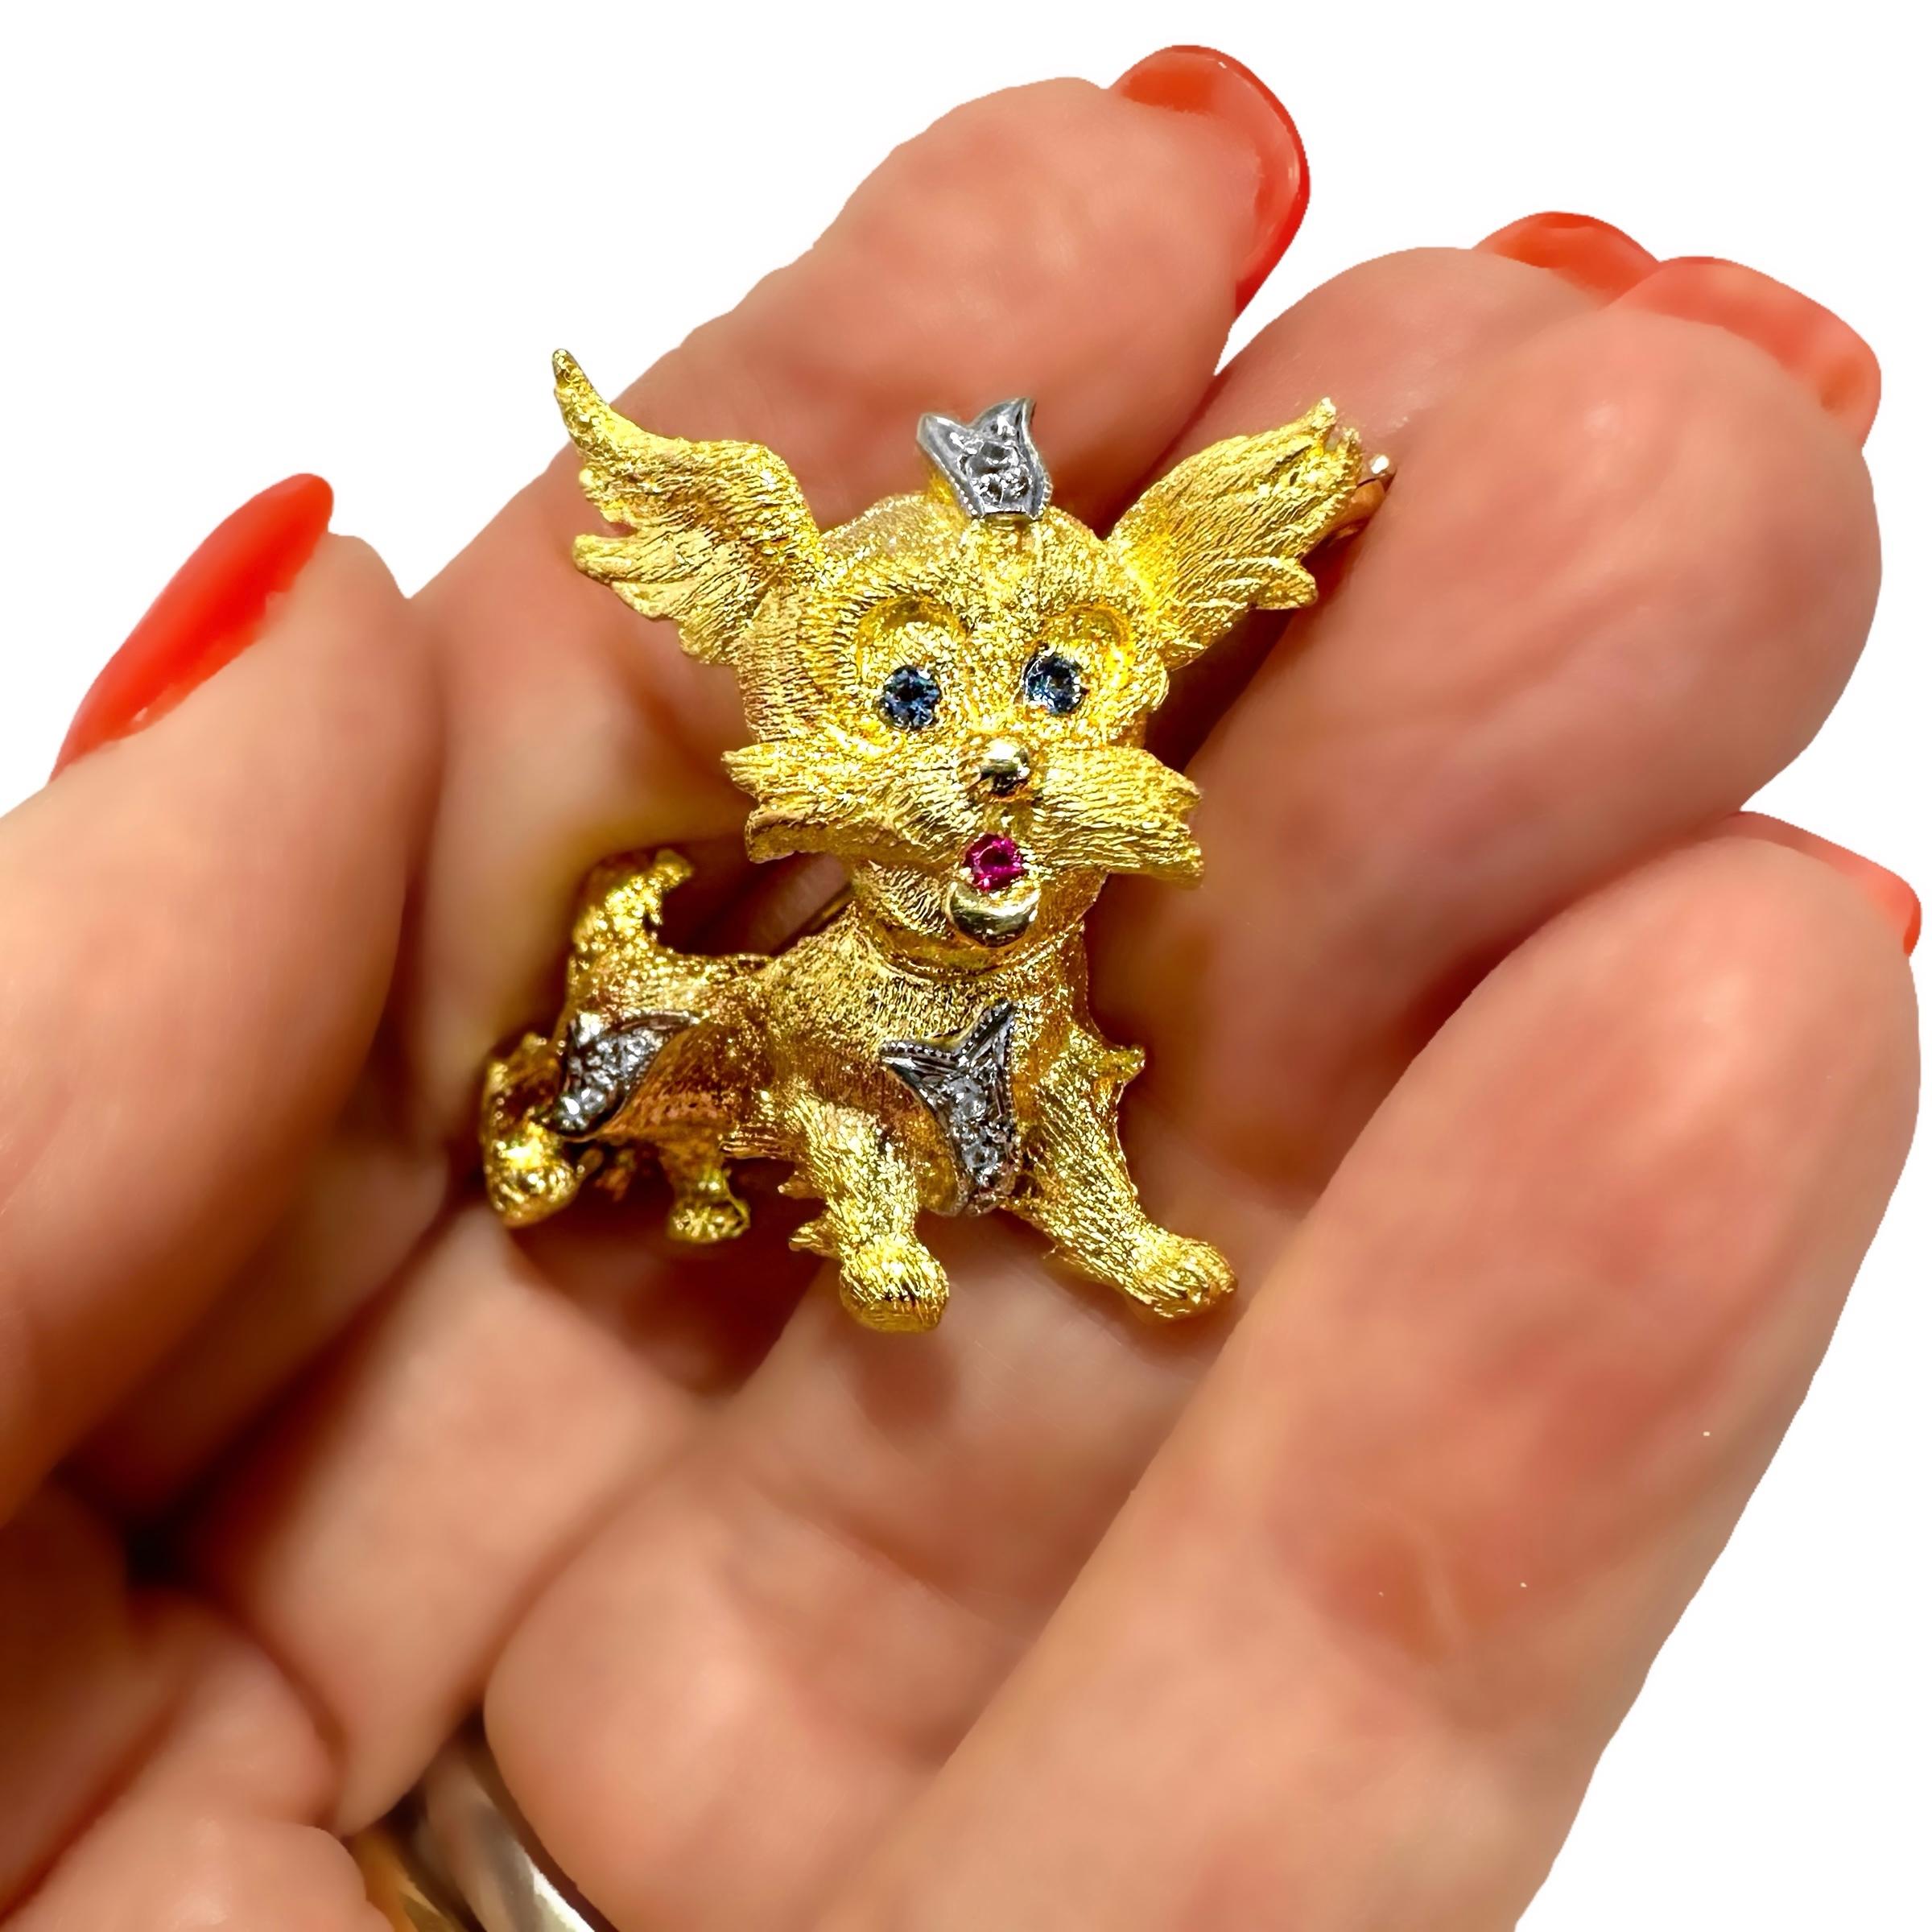 Adorable Puppy Brooch in 18K Yellow Gold with Sapphire Eyes & Ruby Tongue 6